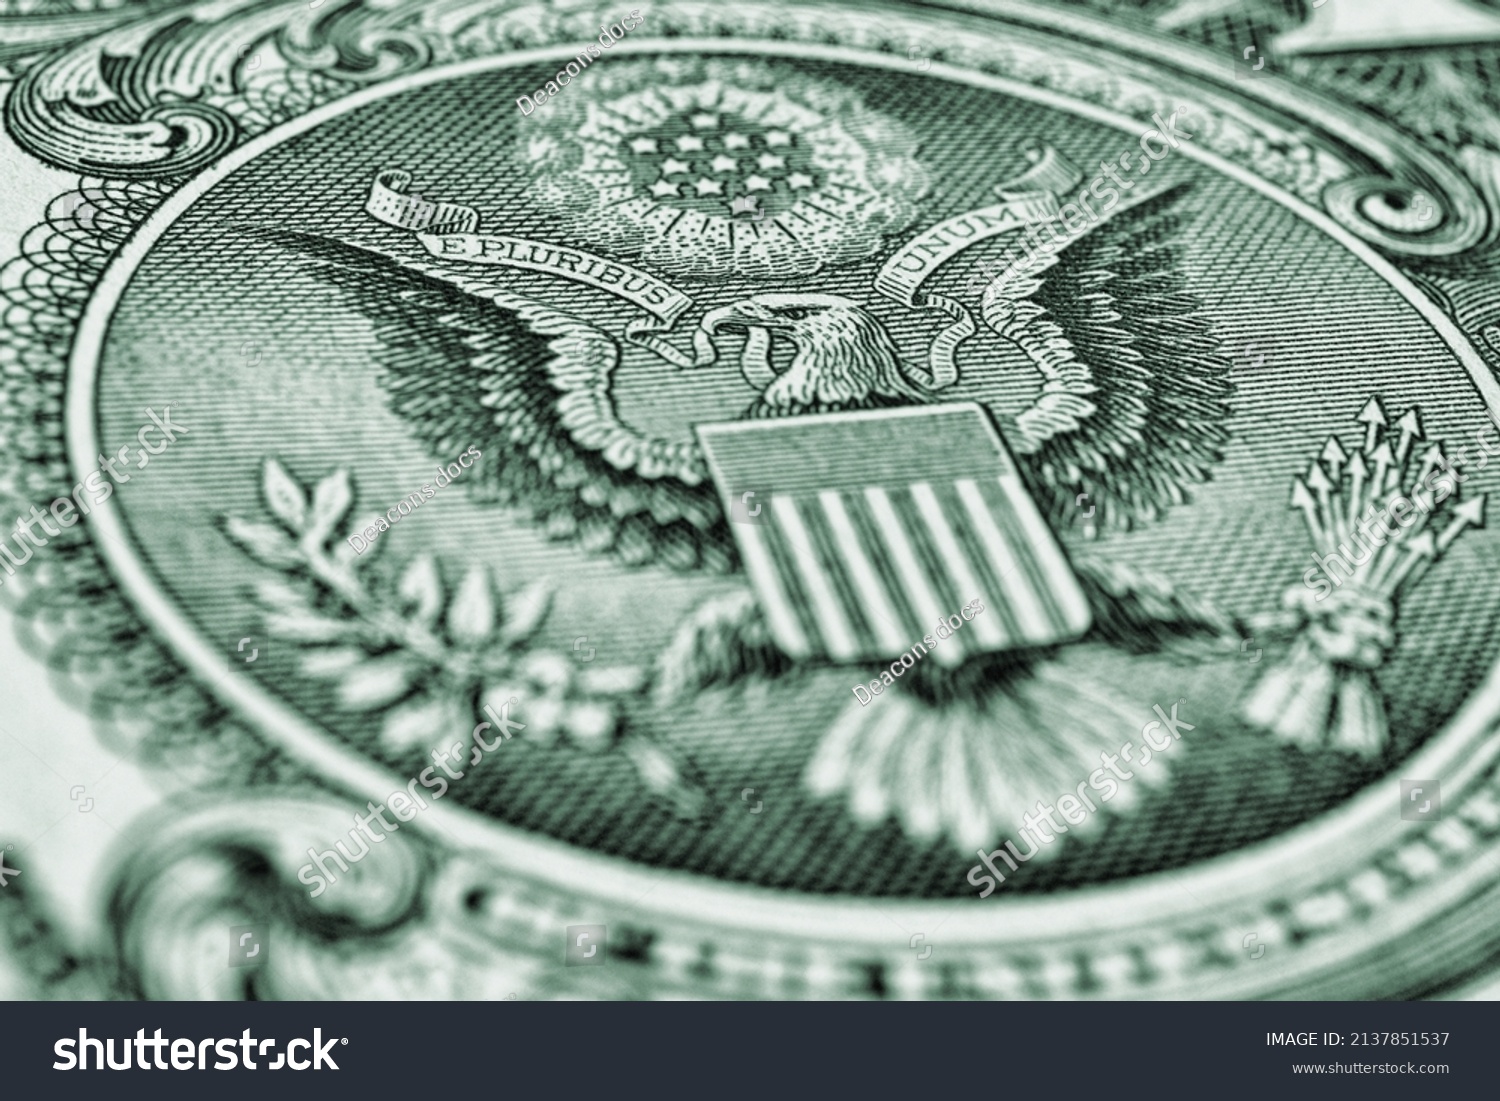 US dollar. Fragment of banknote. Reverse of bill with the Great Seal. The bald eagle is the national symbol. Green tinted illustration. American treasury and treasuries. Economy of the USA #2137851537